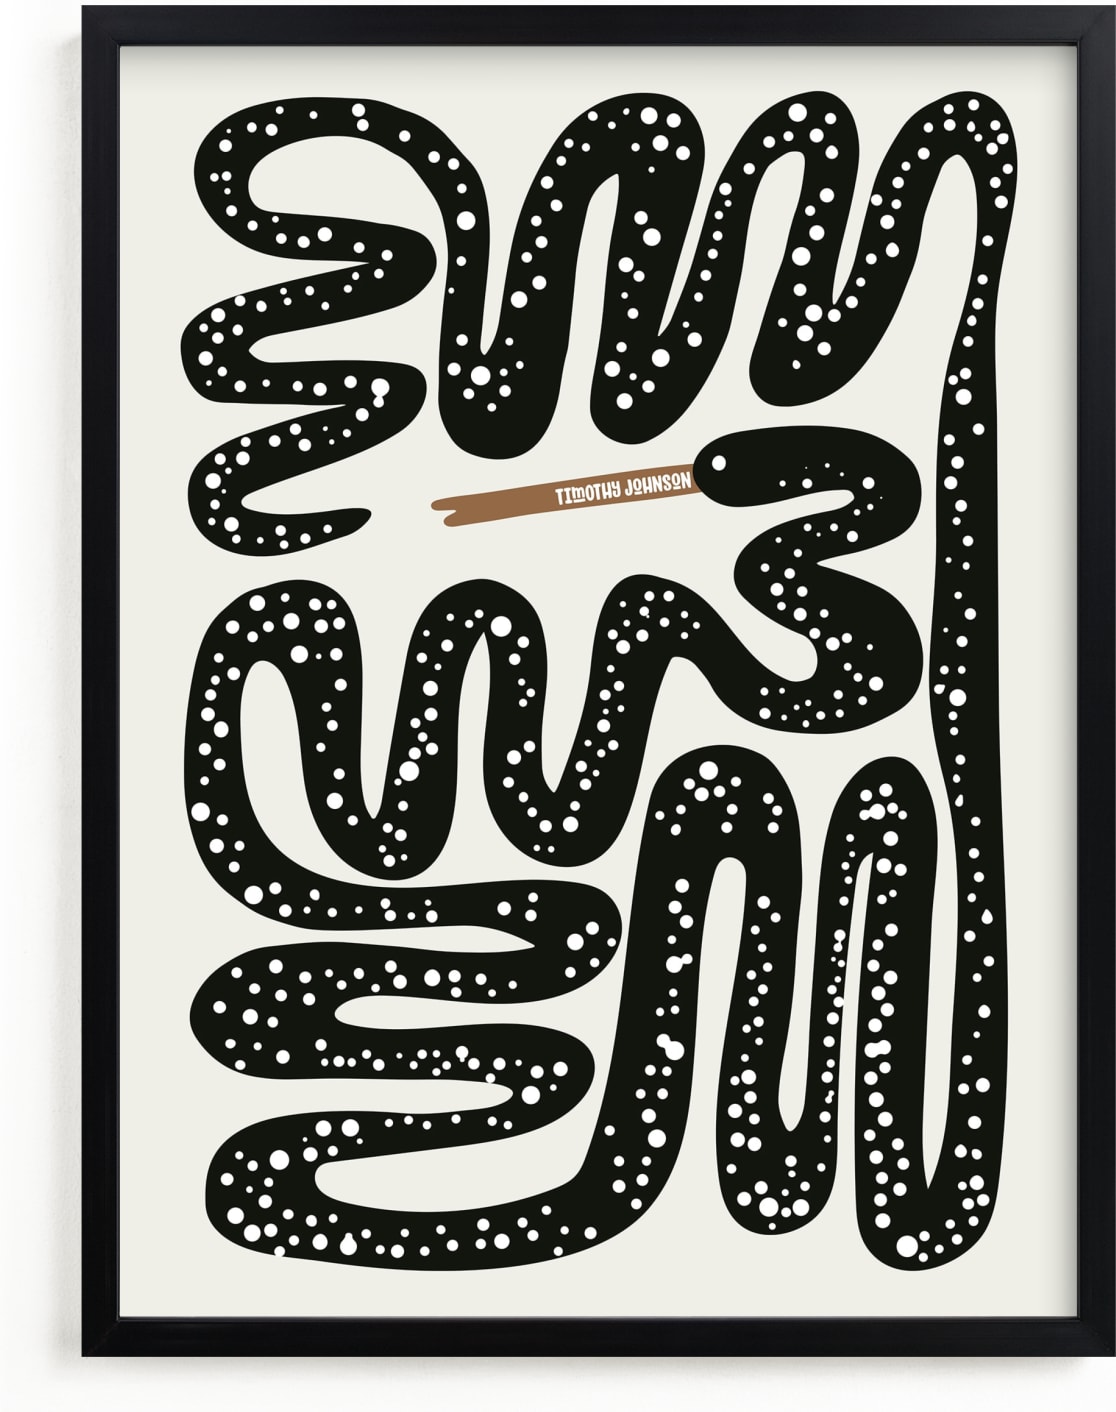 This is a black personalized art for kid by Jenna Holcomb called Squiggly Snake.